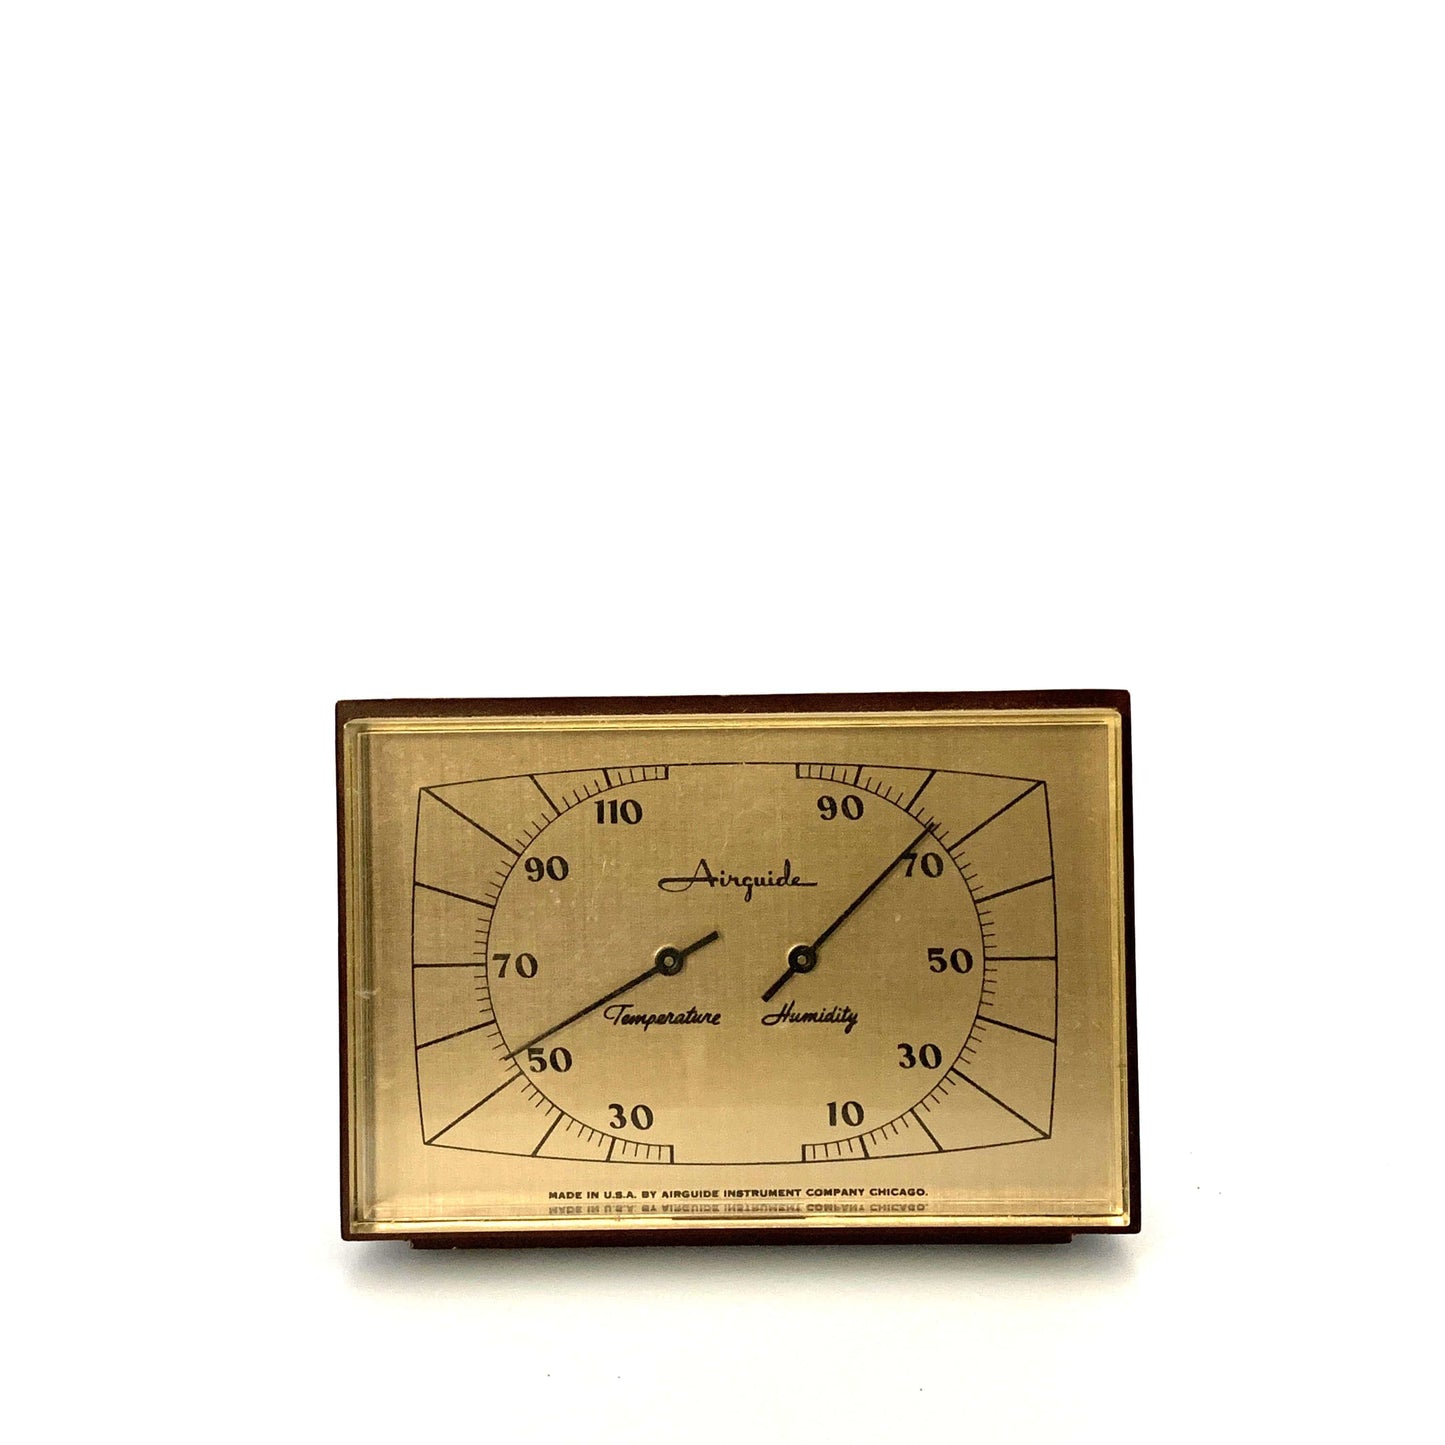 Vintage Airguide Instrument Company Chicago Temperature Humidity Barometer Guage